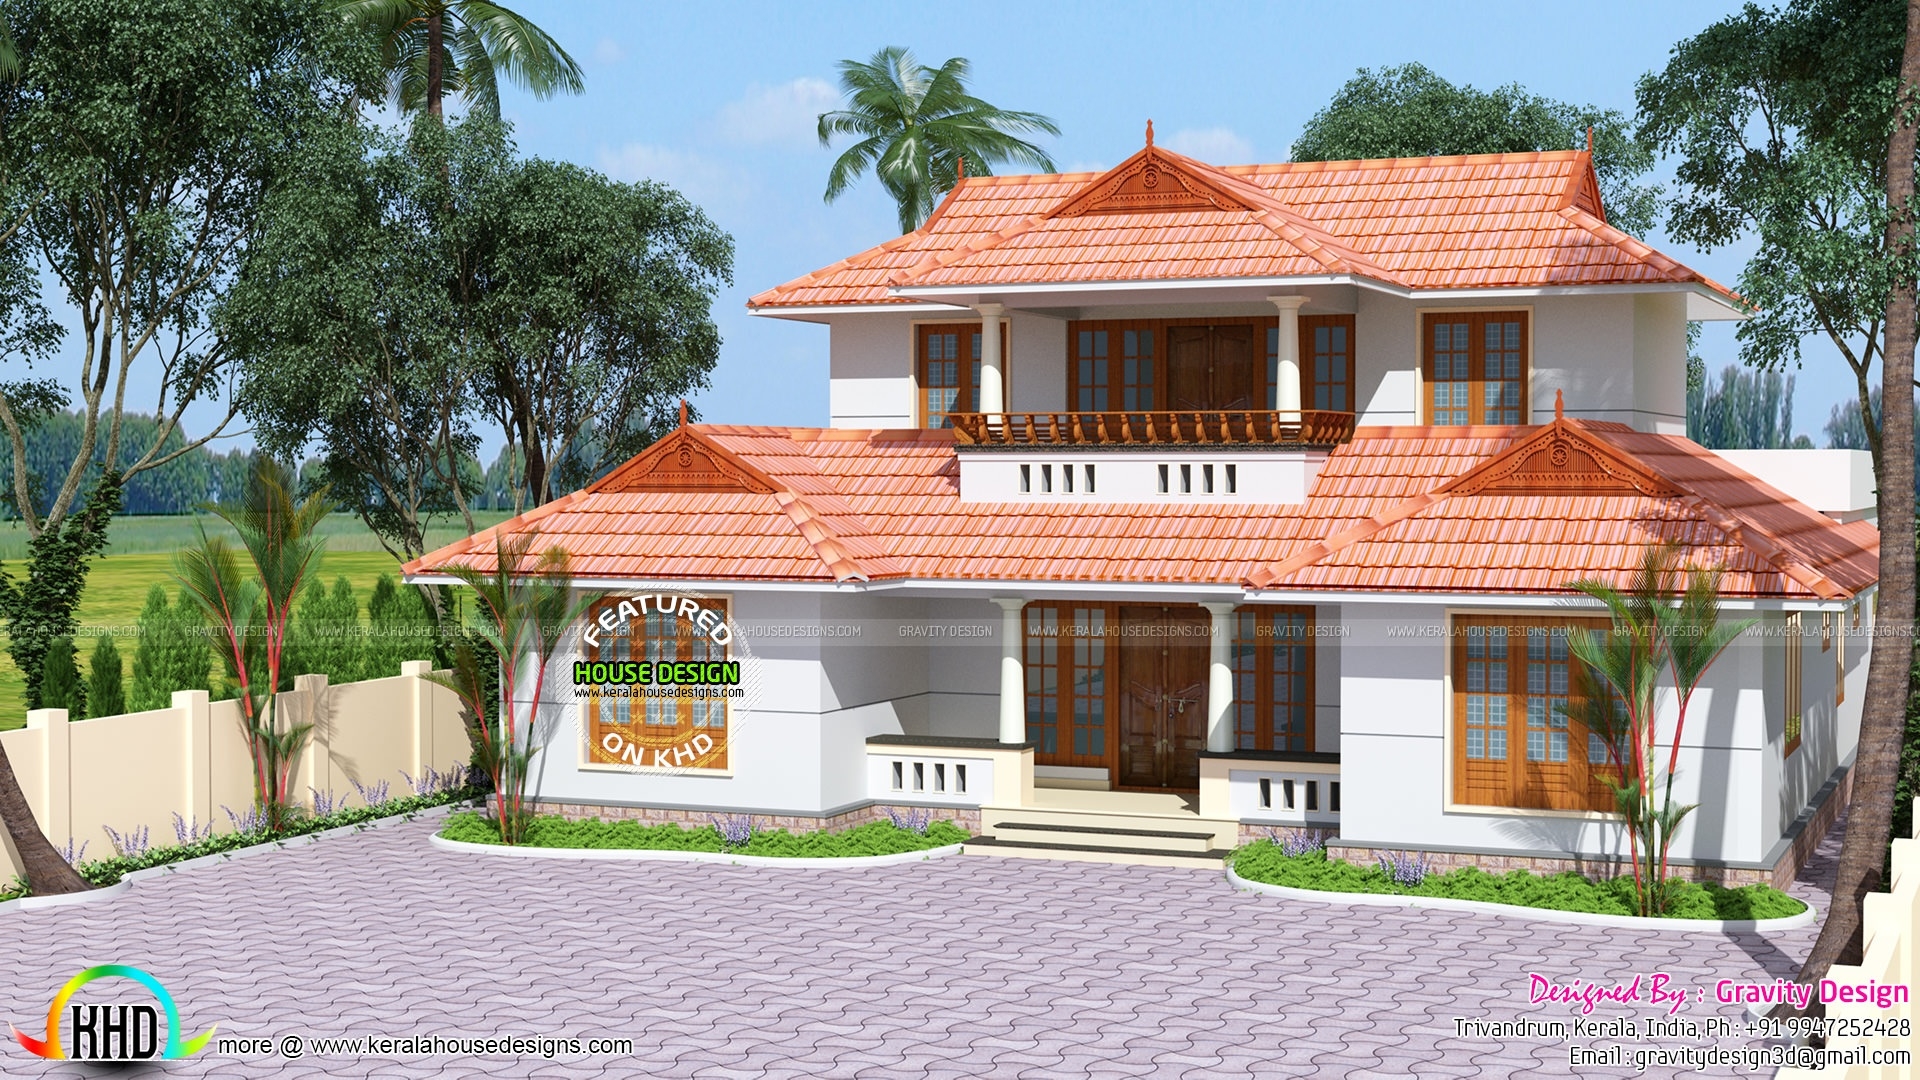 Brilliant traditional kerala roof house kerala home design and floor plans 9k within most inspiring kerala house design with floor plans